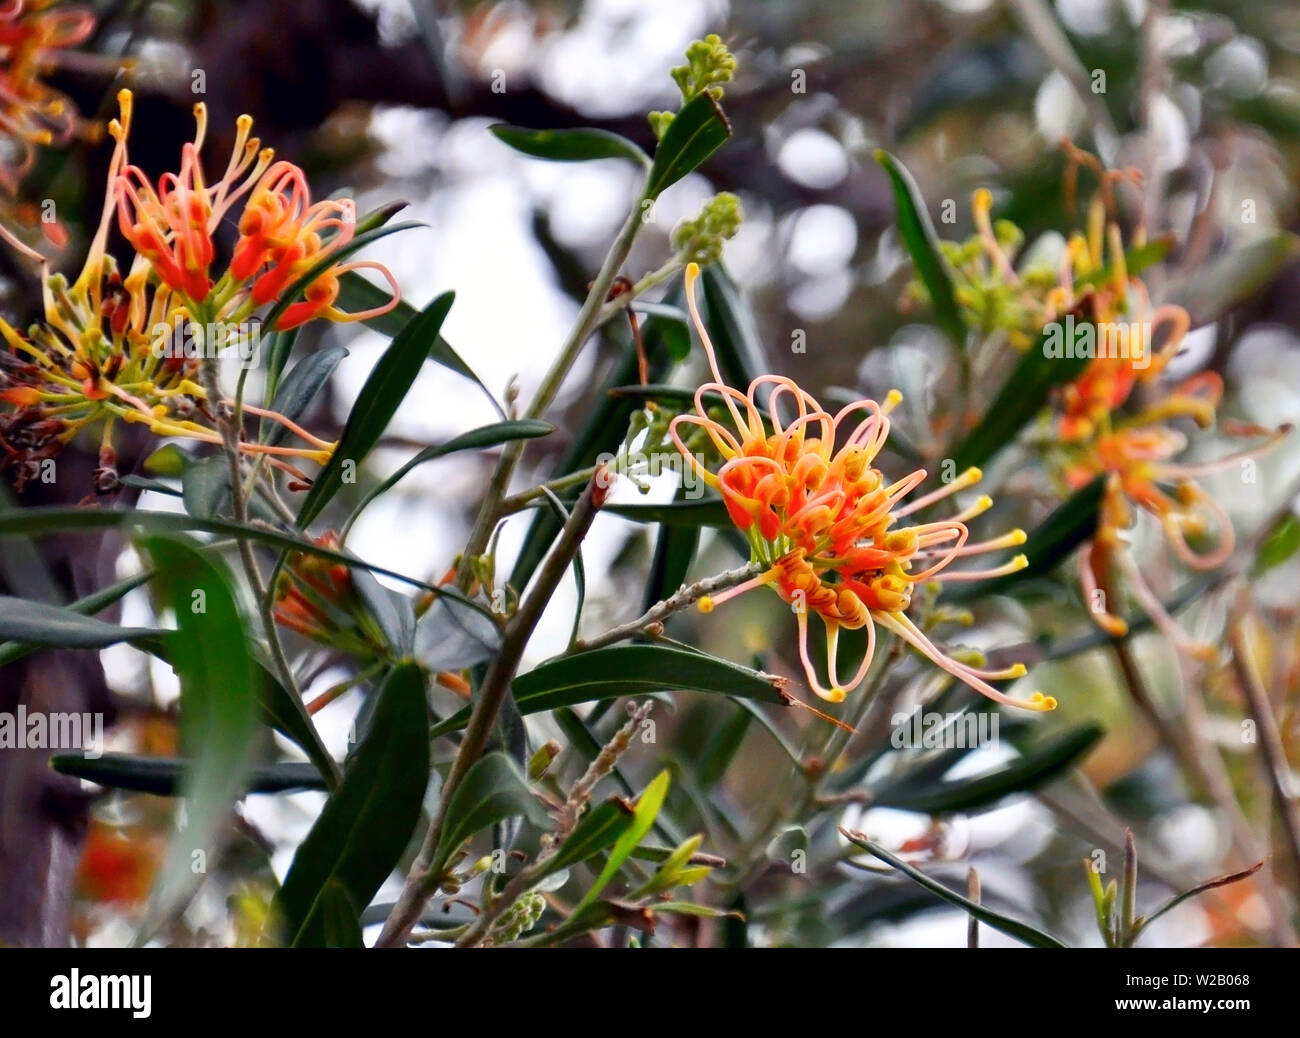 Australian Native Plant, Grevillea 'Apricot Glow', cultivar of Grevillea olivacea with clusters of apricot orange spider flowers in winter and spring. Stock Photo